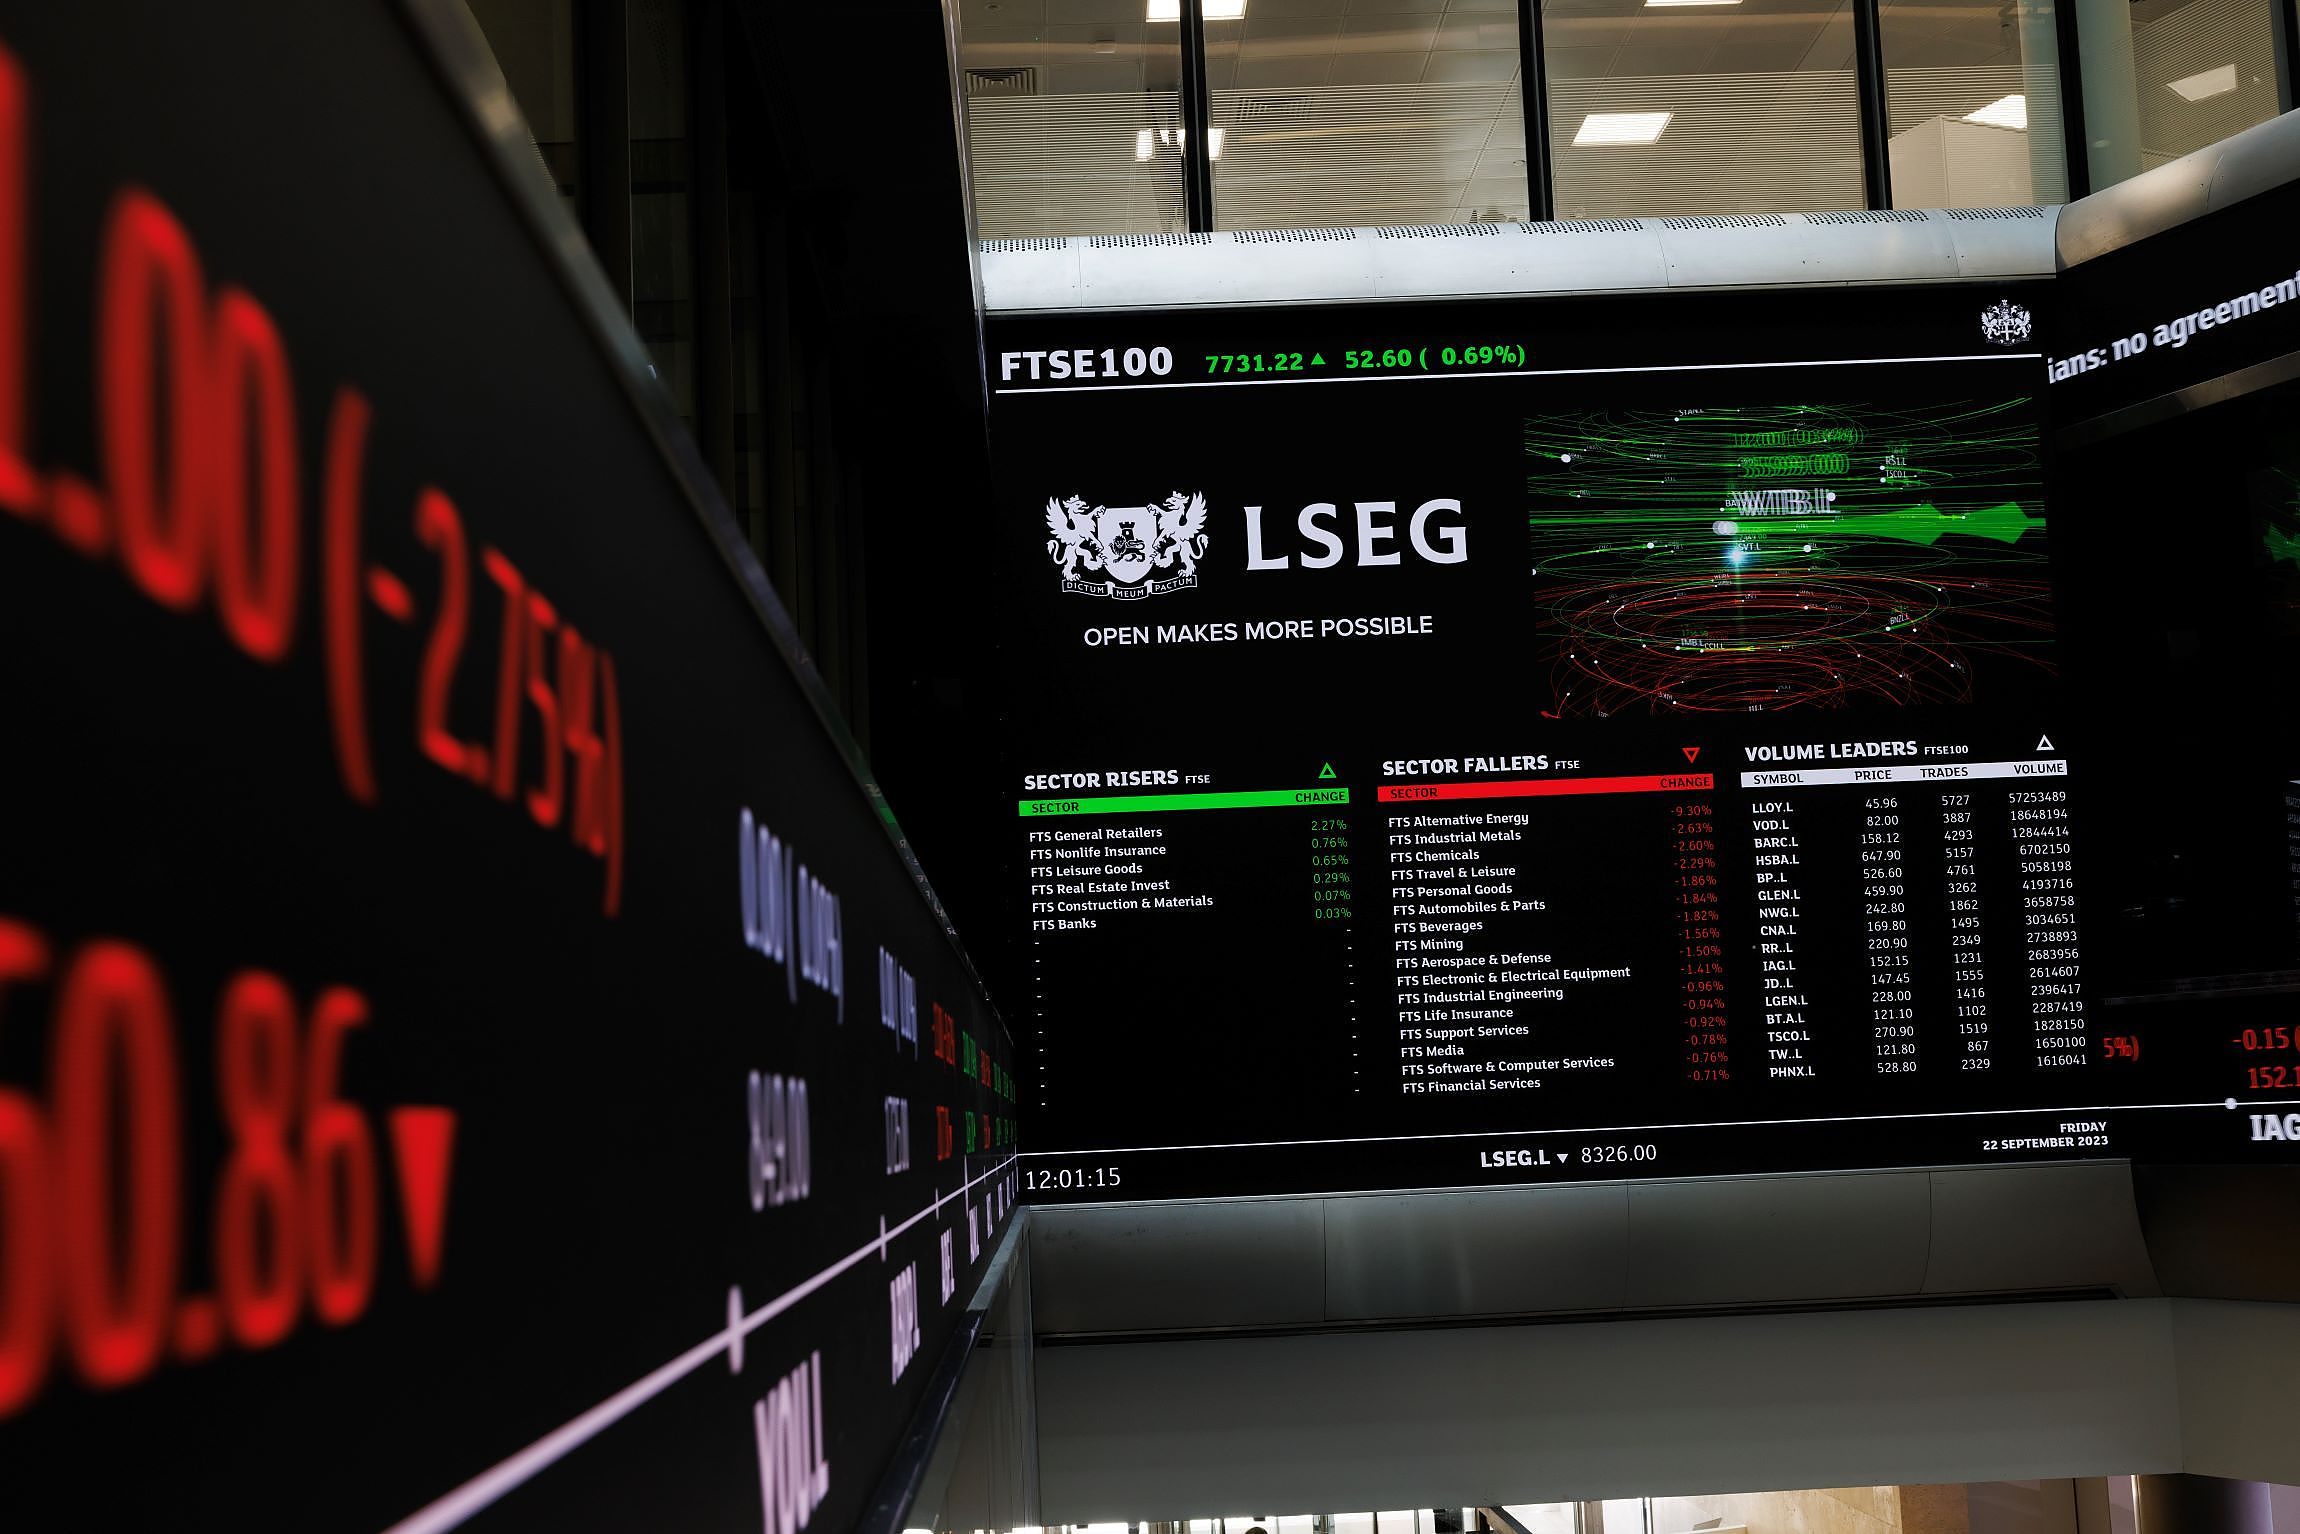 London Stock Exchange (LSE) - Overview, Primary & Specialized Markets